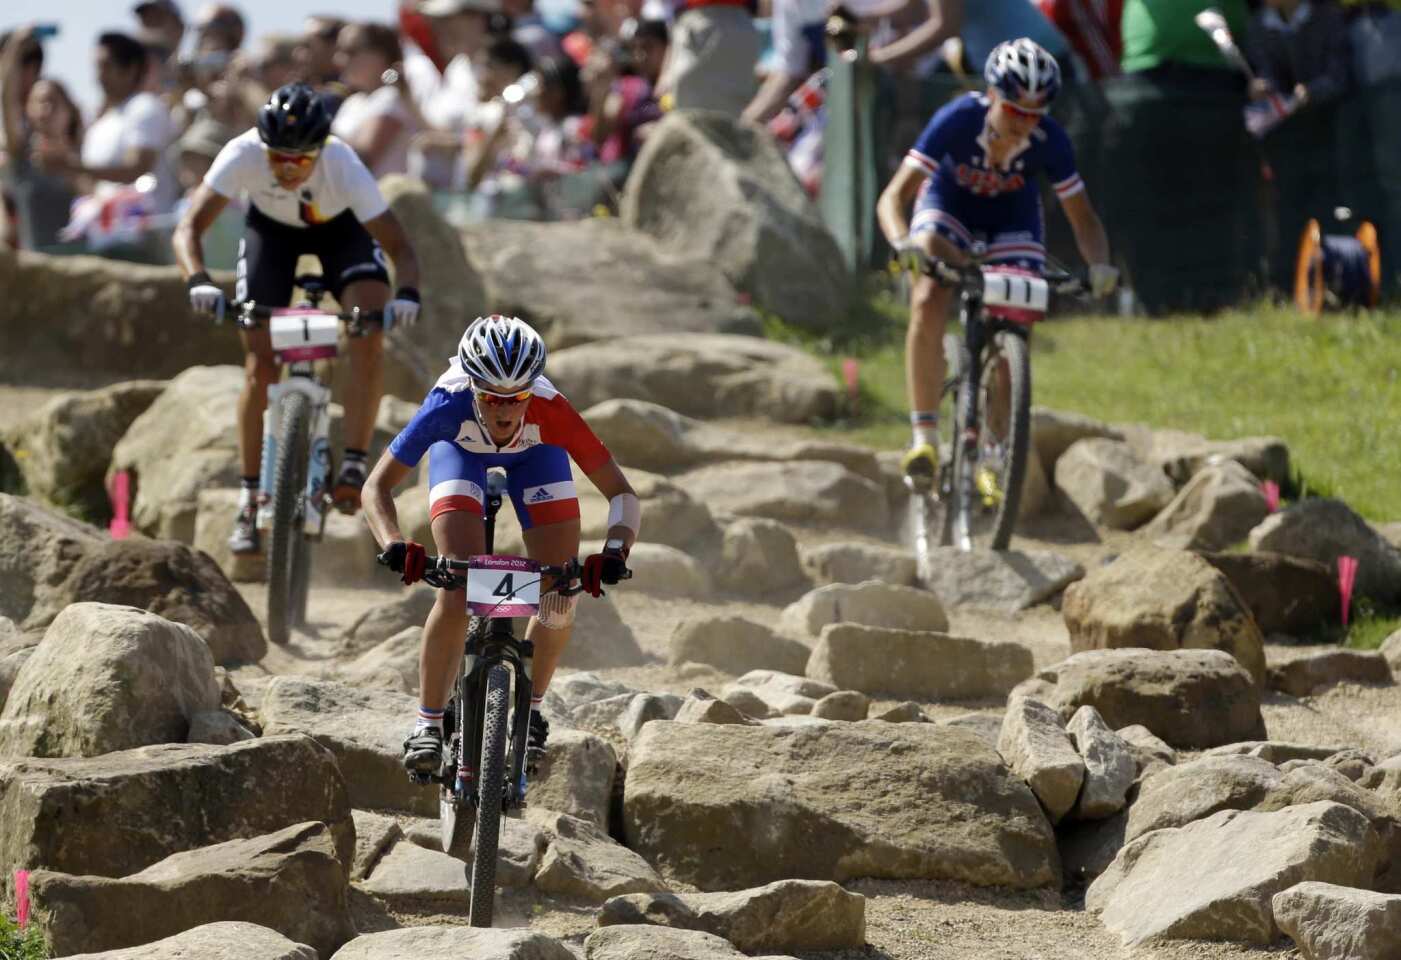 Gold medal's winner Julie Bresset, of France, leads Germany's silver medalist Sabine Spitz, left, and United States' bronze medalist Georgia Gould during the women's cross-country mountain bike race.